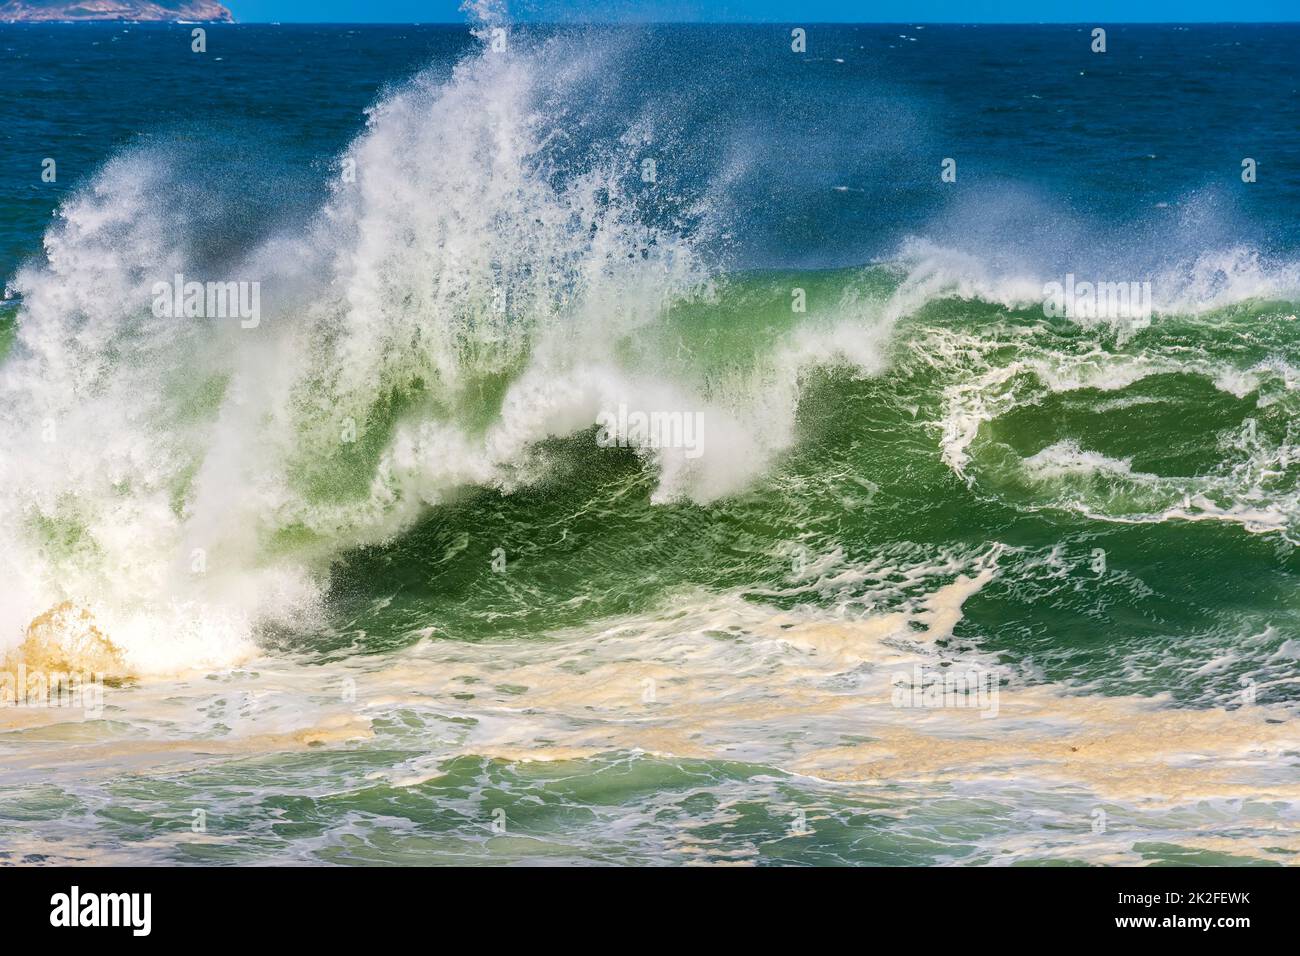 Wave crashing during stormy weather on a sunny day Stock Photo